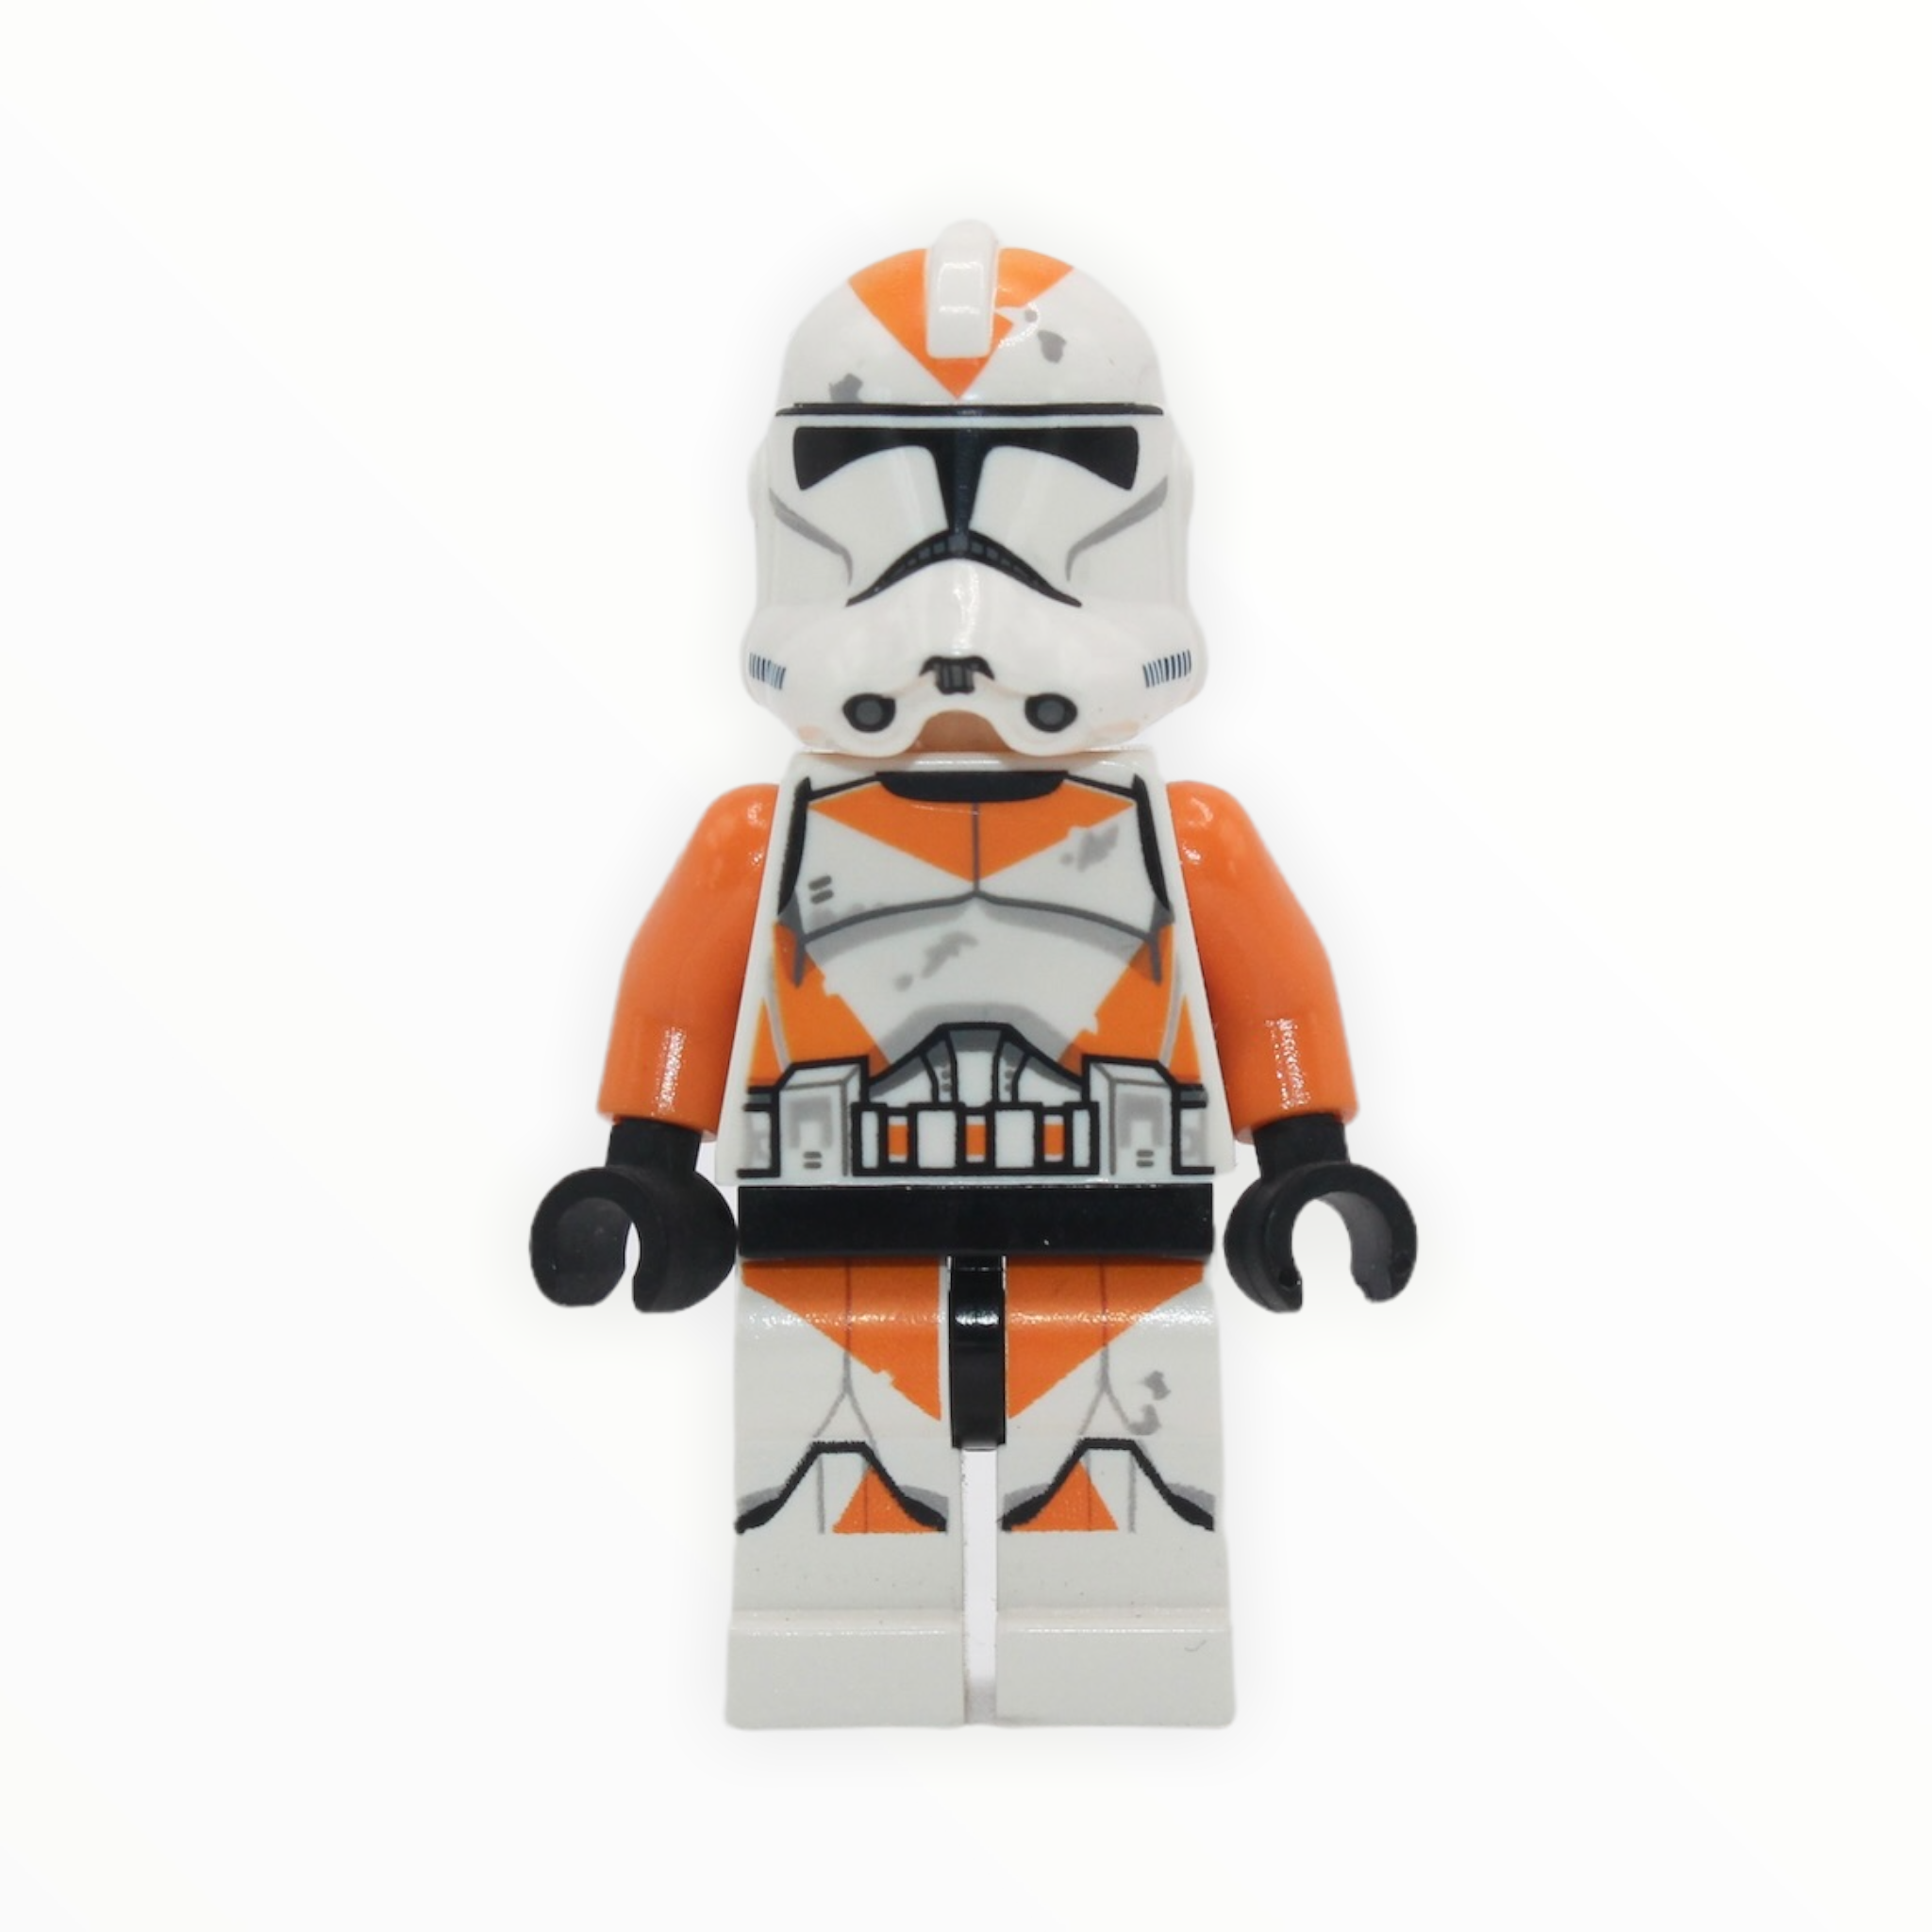 212th Battalion Clone Trooper (orange arms and details, Phase II, 2014)